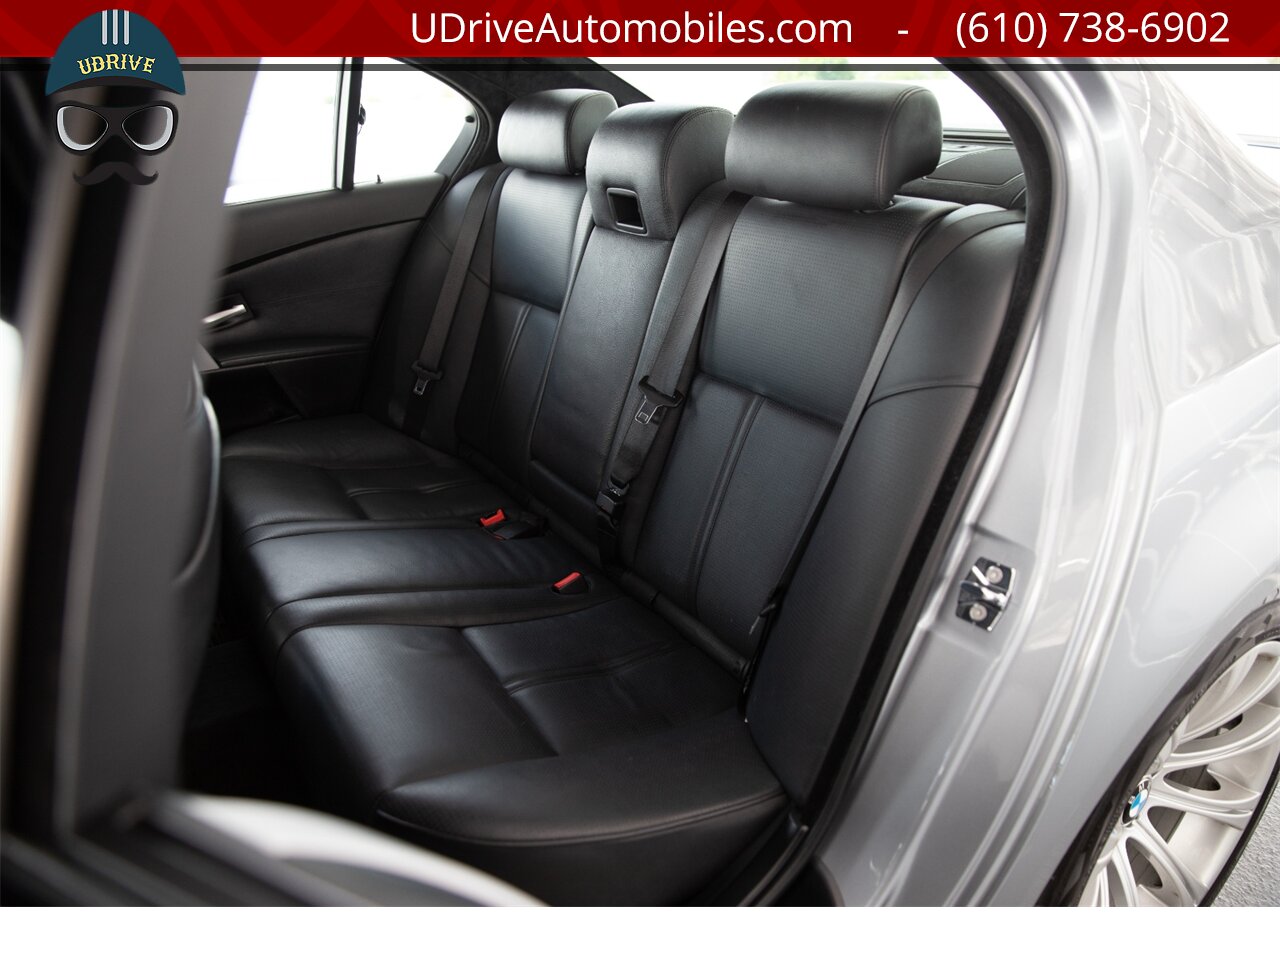 2007 BMW M5 6 Speed Manual Multi Function Dynamic Seats  Vented Seats Shades - Photo 39 - West Chester, PA 19382